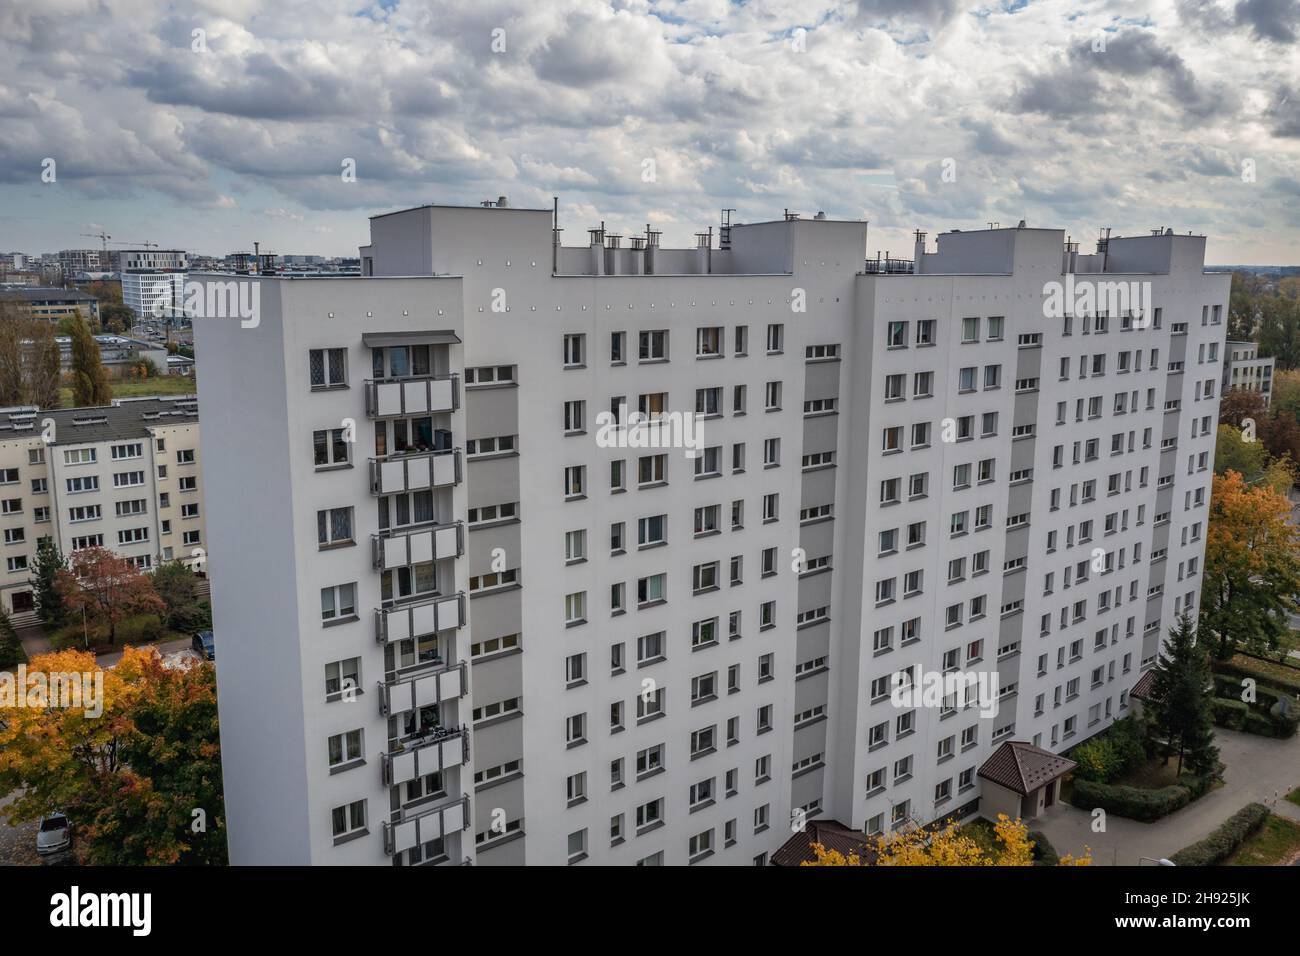 Residential building on the edge of Wlochy and Ochota districts of Warsaw city, Poland Stock Photo